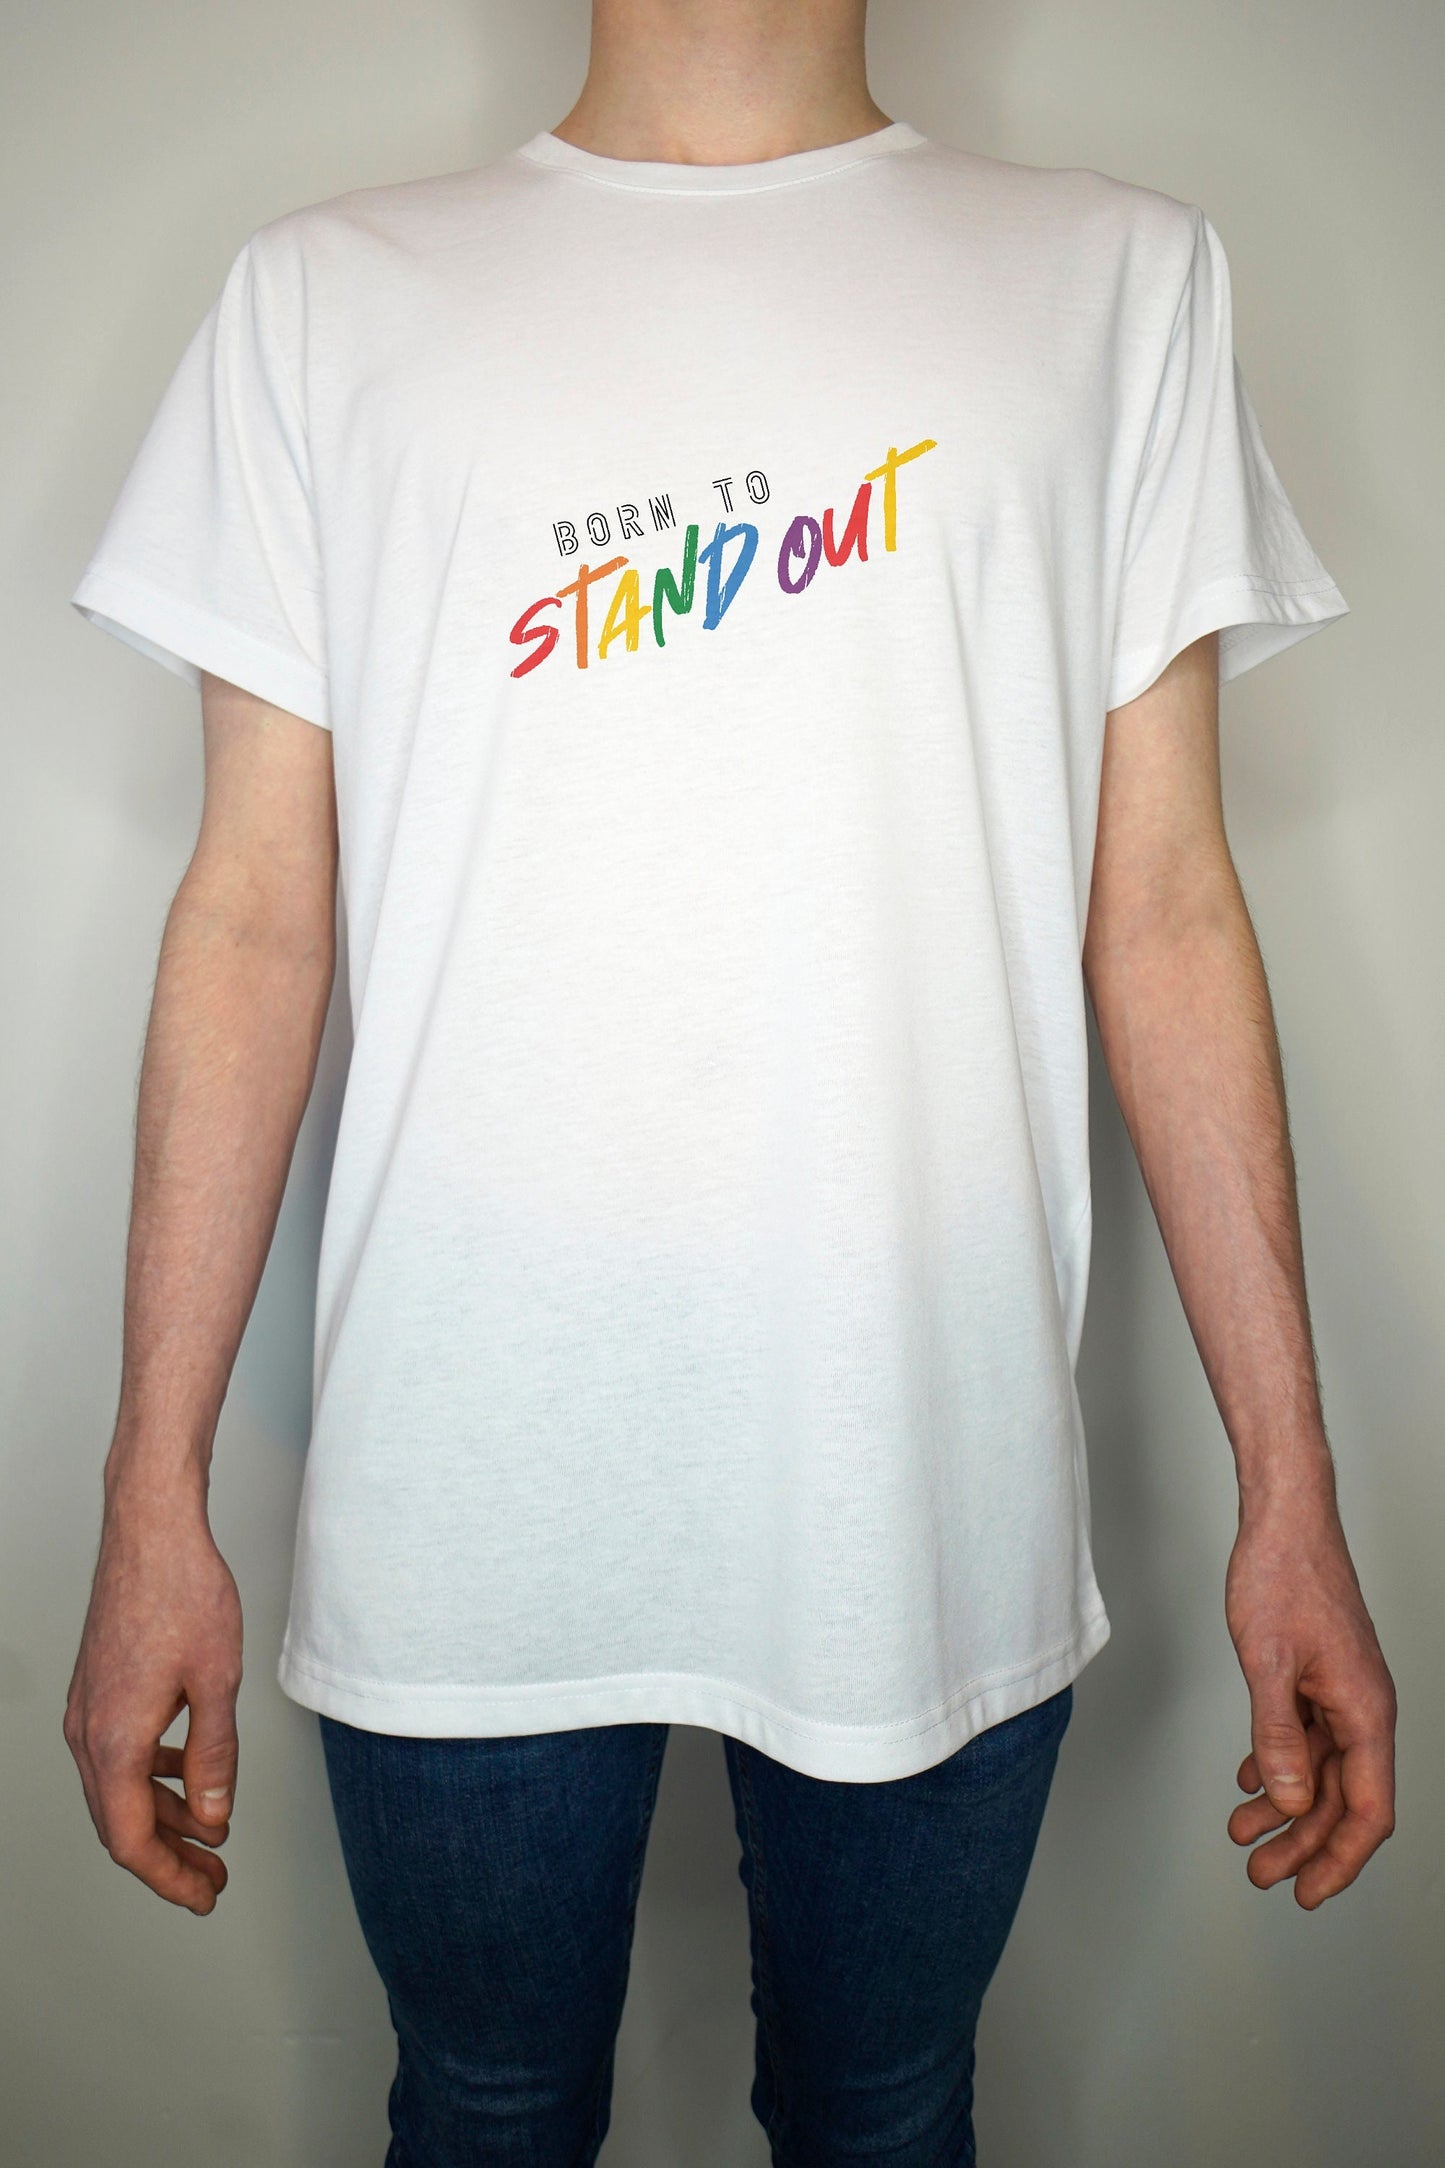 Born to stand out  - 80s retro memphis art pride - Premium Quality Summer Light weight 65/35 Polyester Cotton